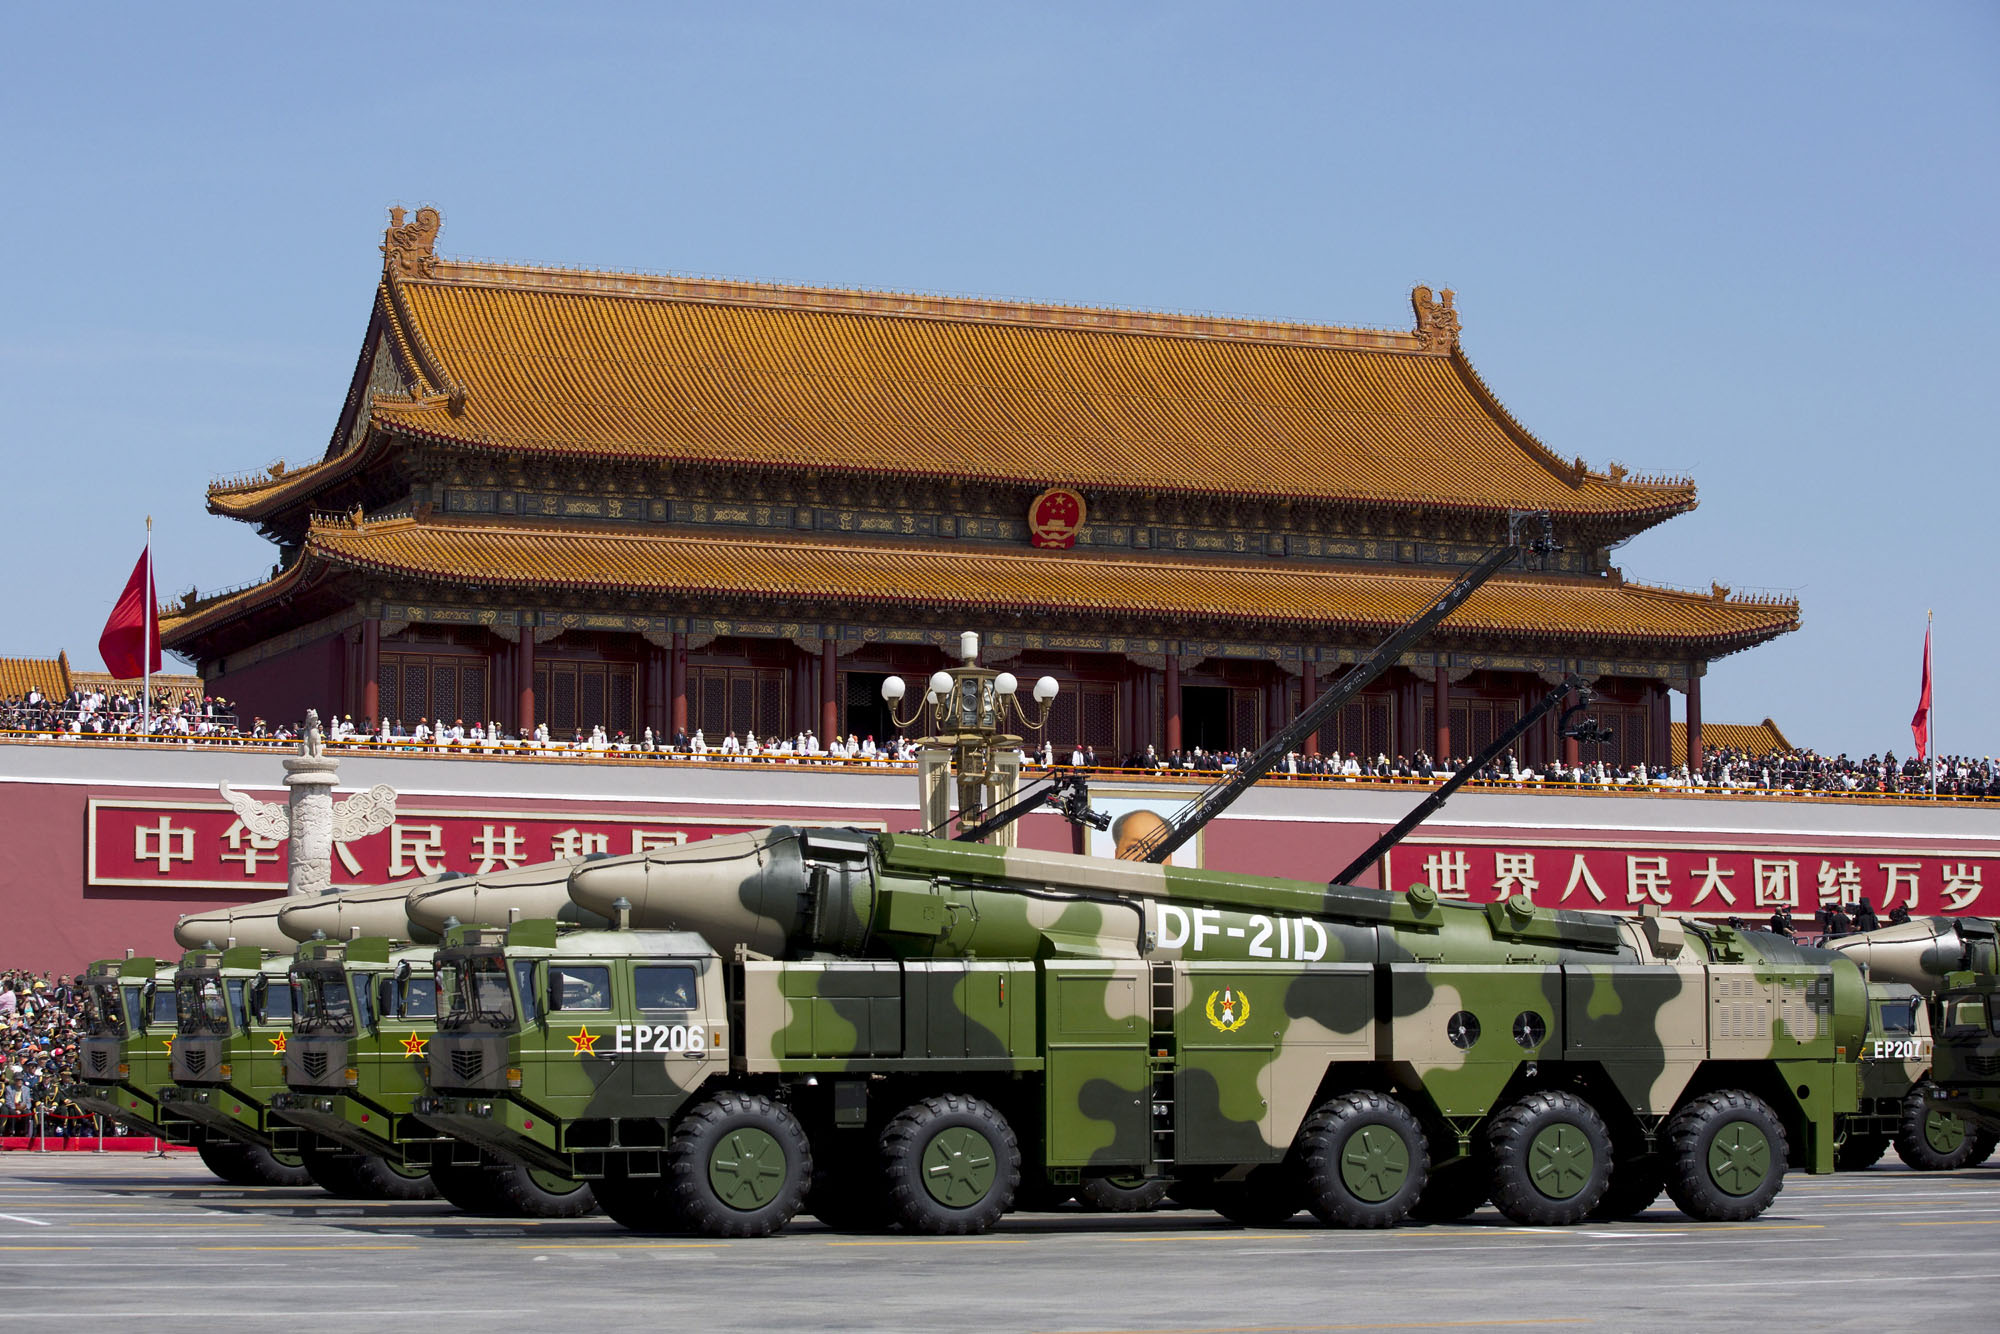 Chinese military vehicles carrying DF-21D anti-ship ballistic missiles travel past Tiananmen Gate during a military parade to commemorate the 70th anniversary of the end of World War II in Beijing in September 2015. | AP